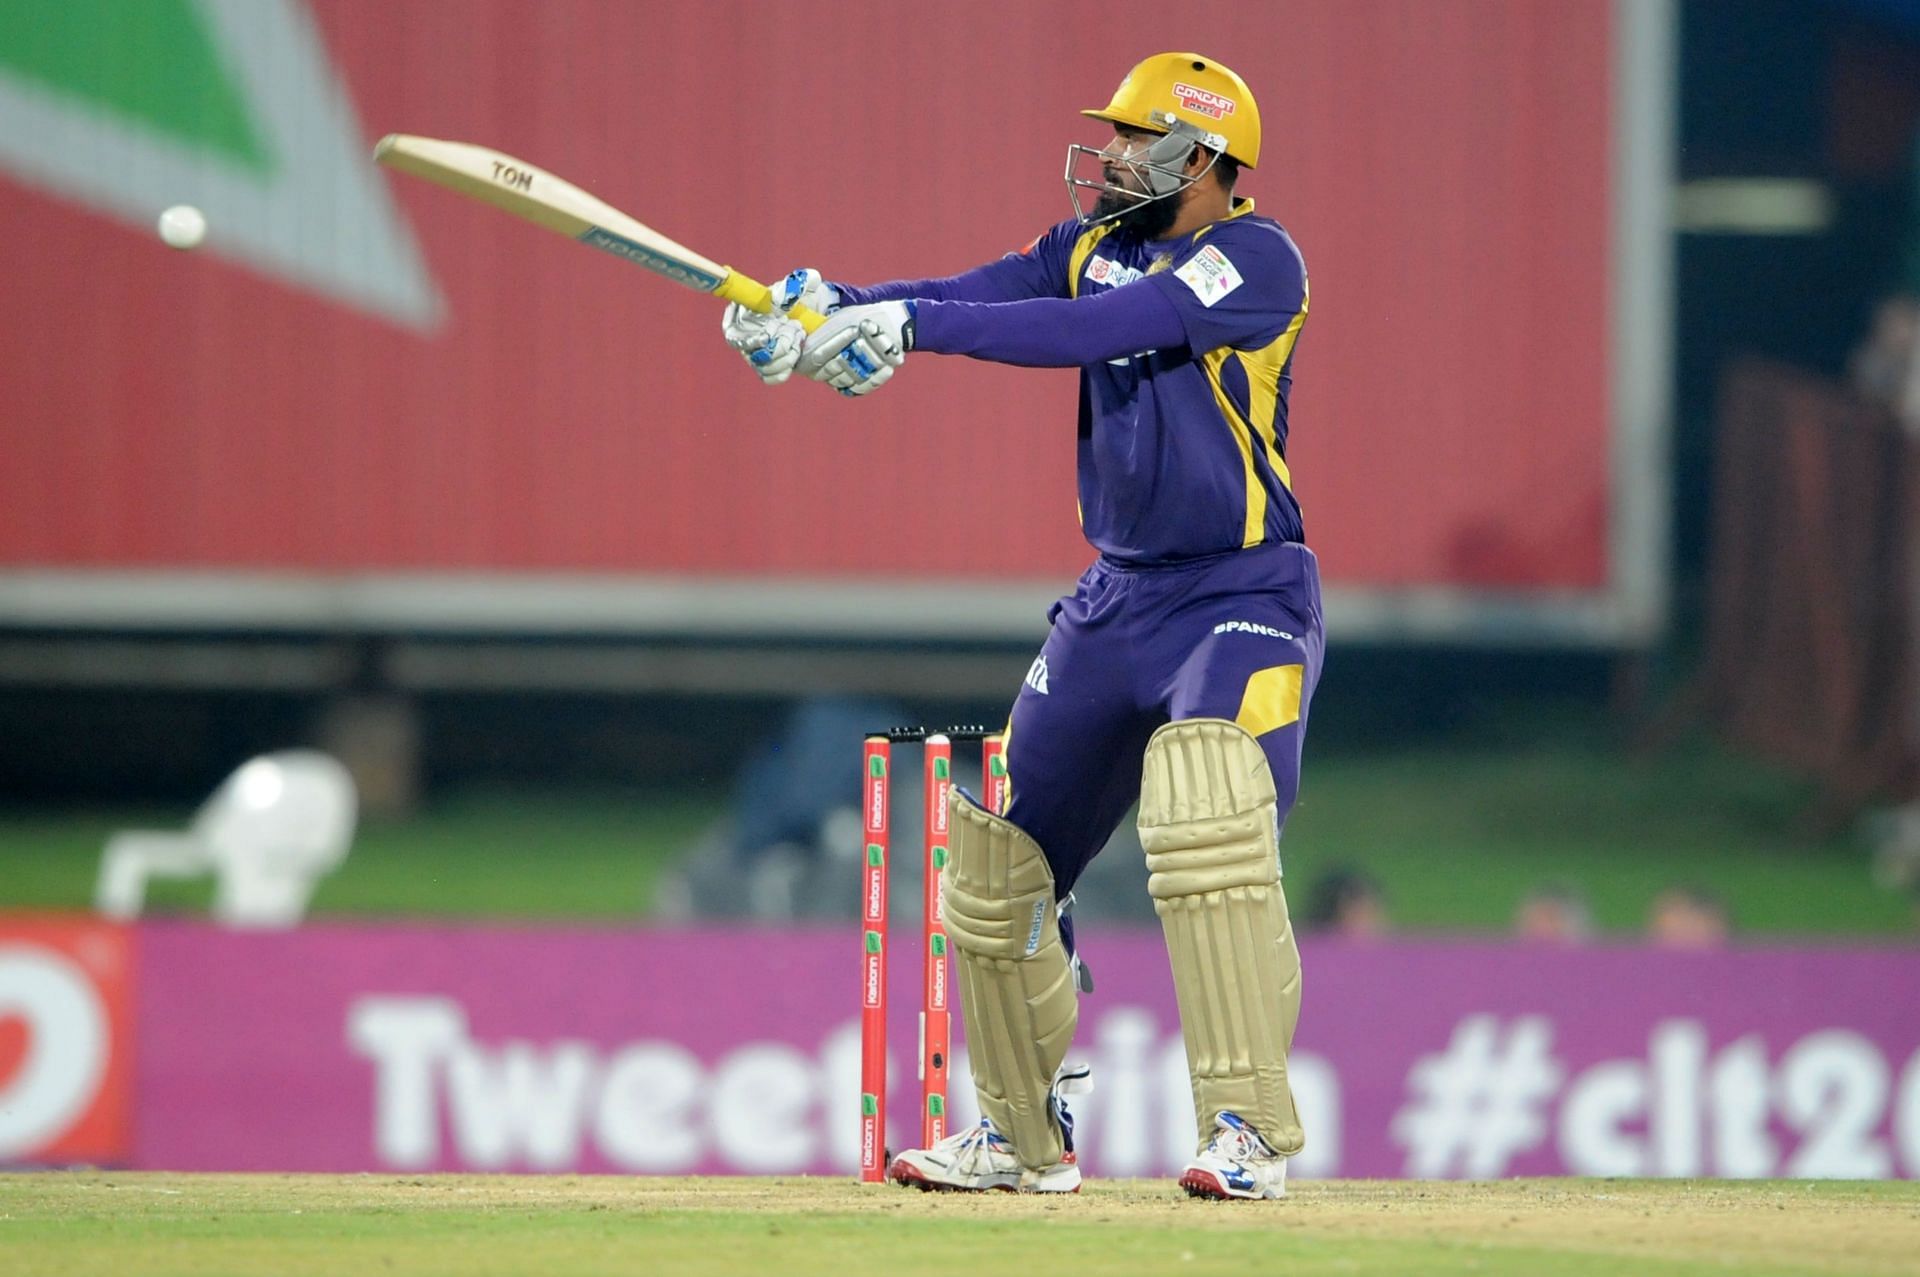 &lt;a href=&#039;https://www.sportskeeda.com/player/yusuf-pathan&#039; target=&#039;_blank&#039; rel=&#039;noopener noreferrer&#039;&gt;Yusuf Pathan&lt;/a&gt; playing for Kolkata Knight Riders